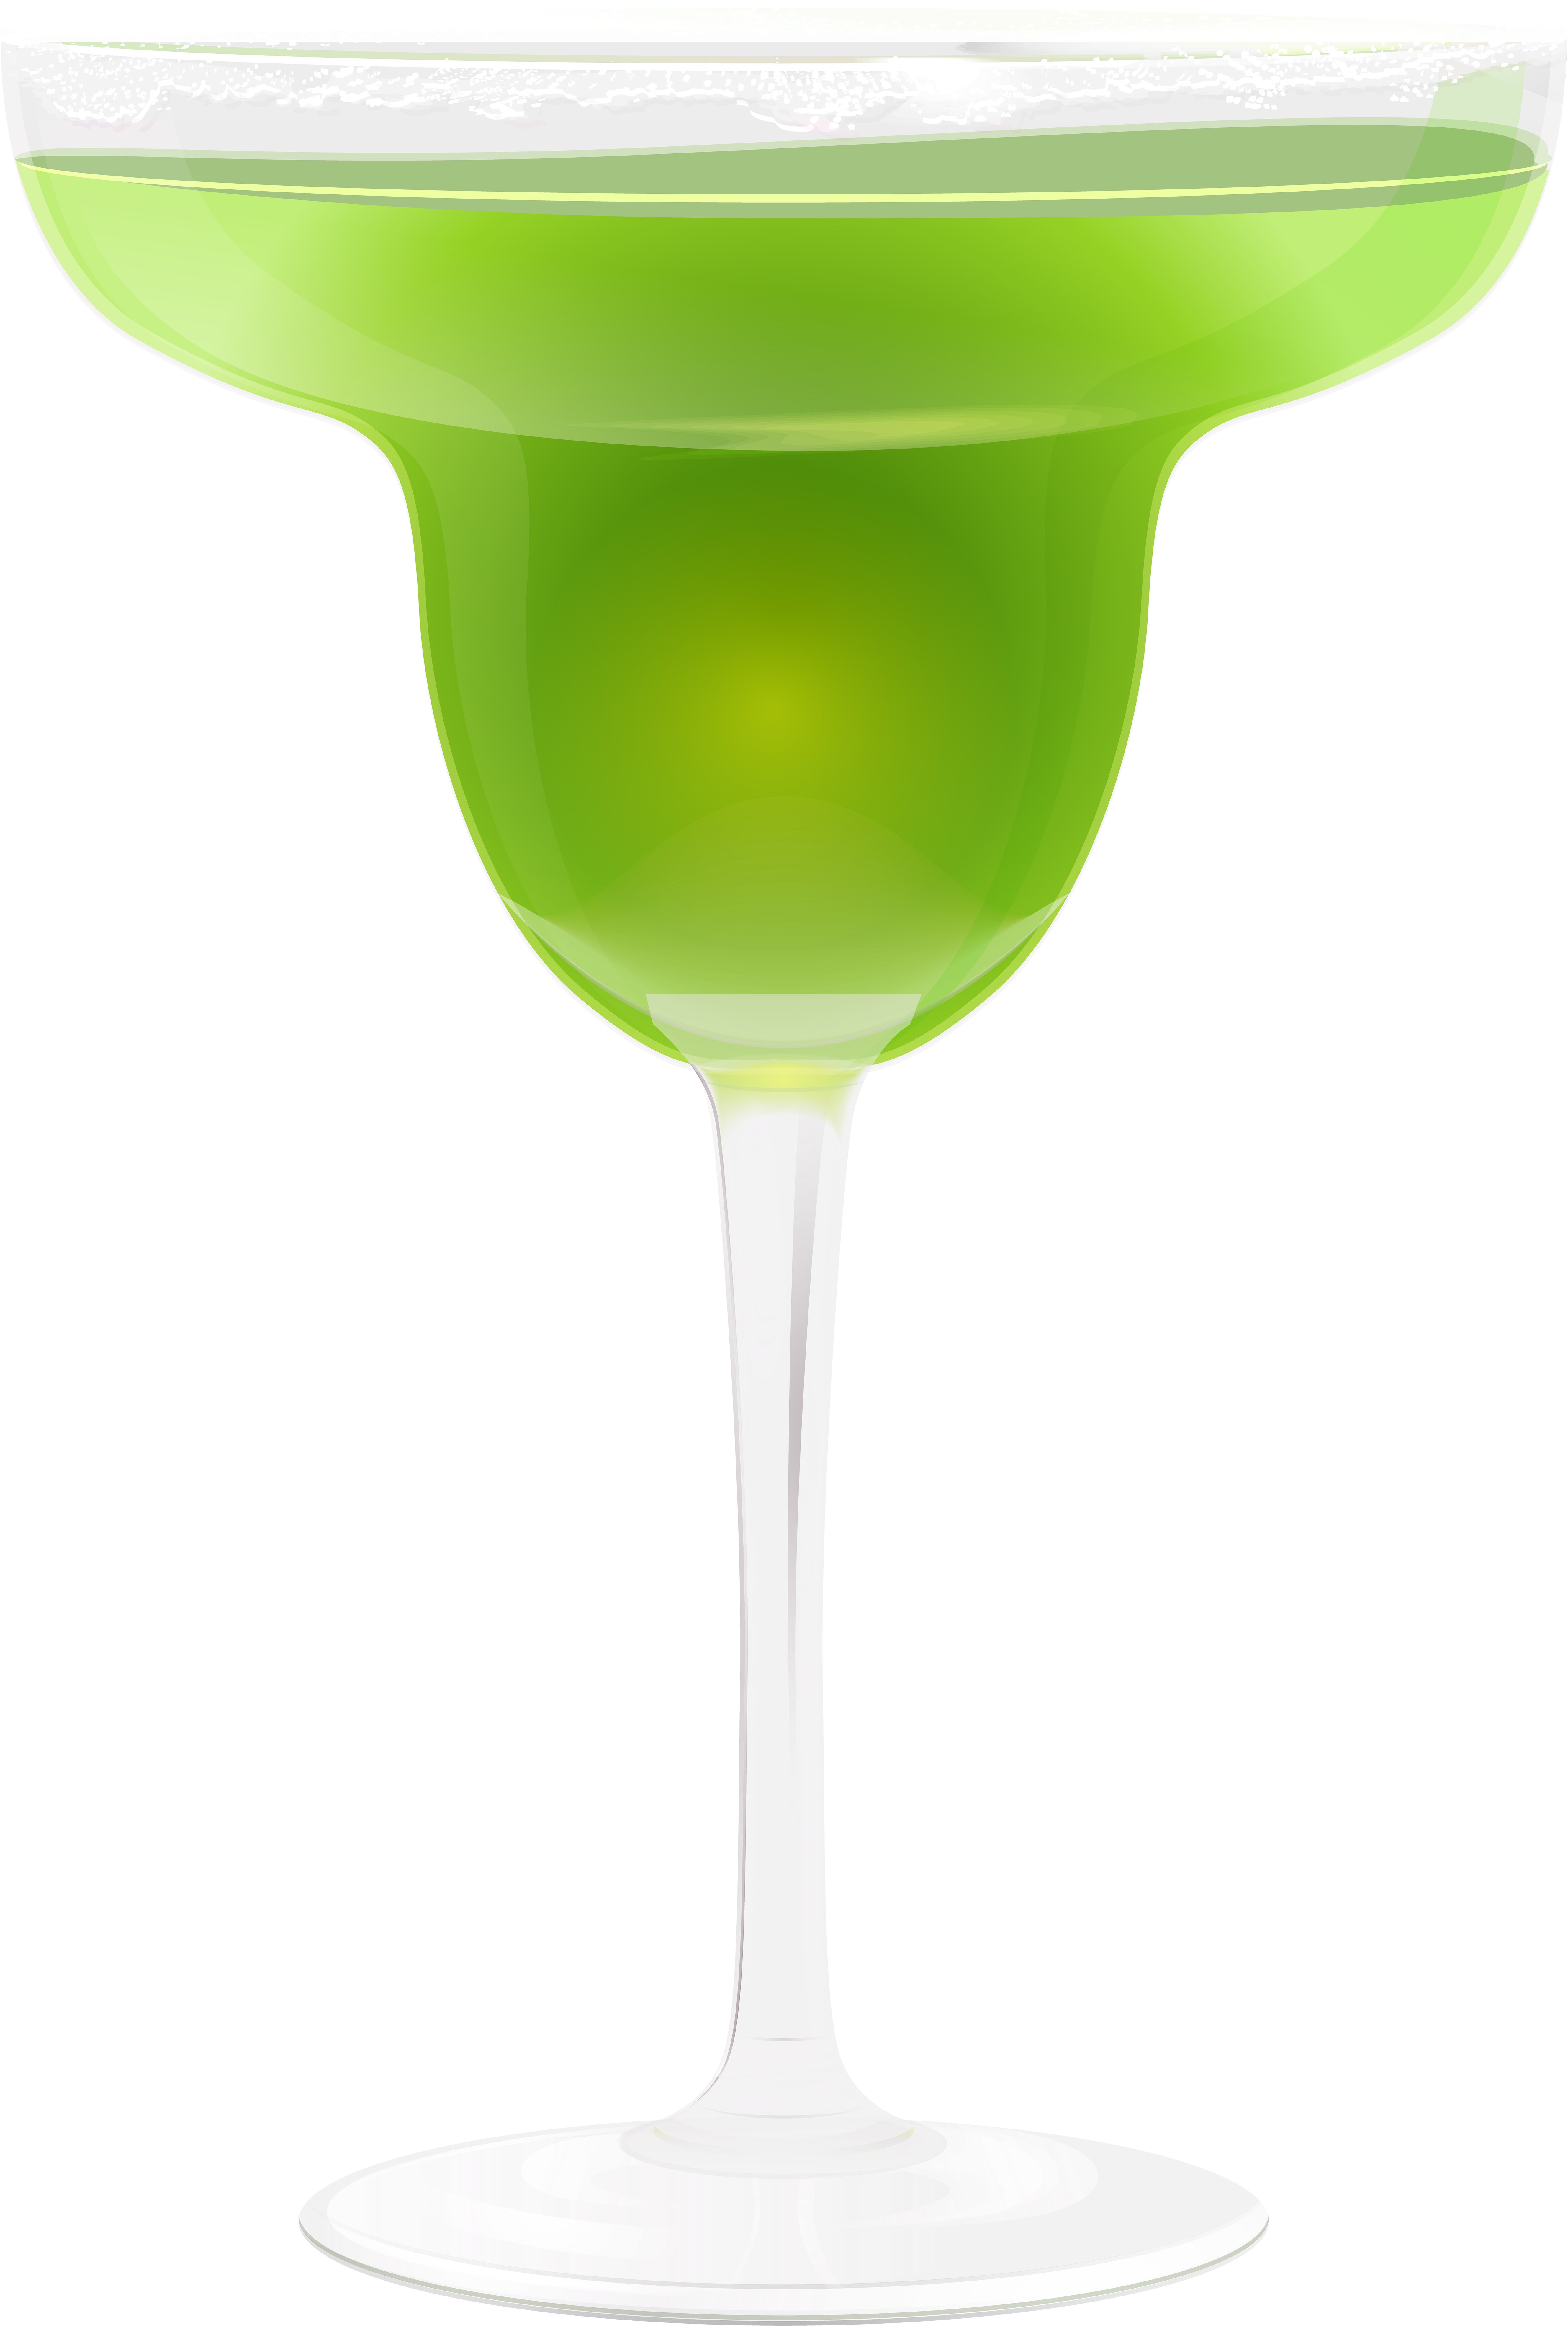 Green Drink Clip Art Png Image - Martini Glass (5499x8000)